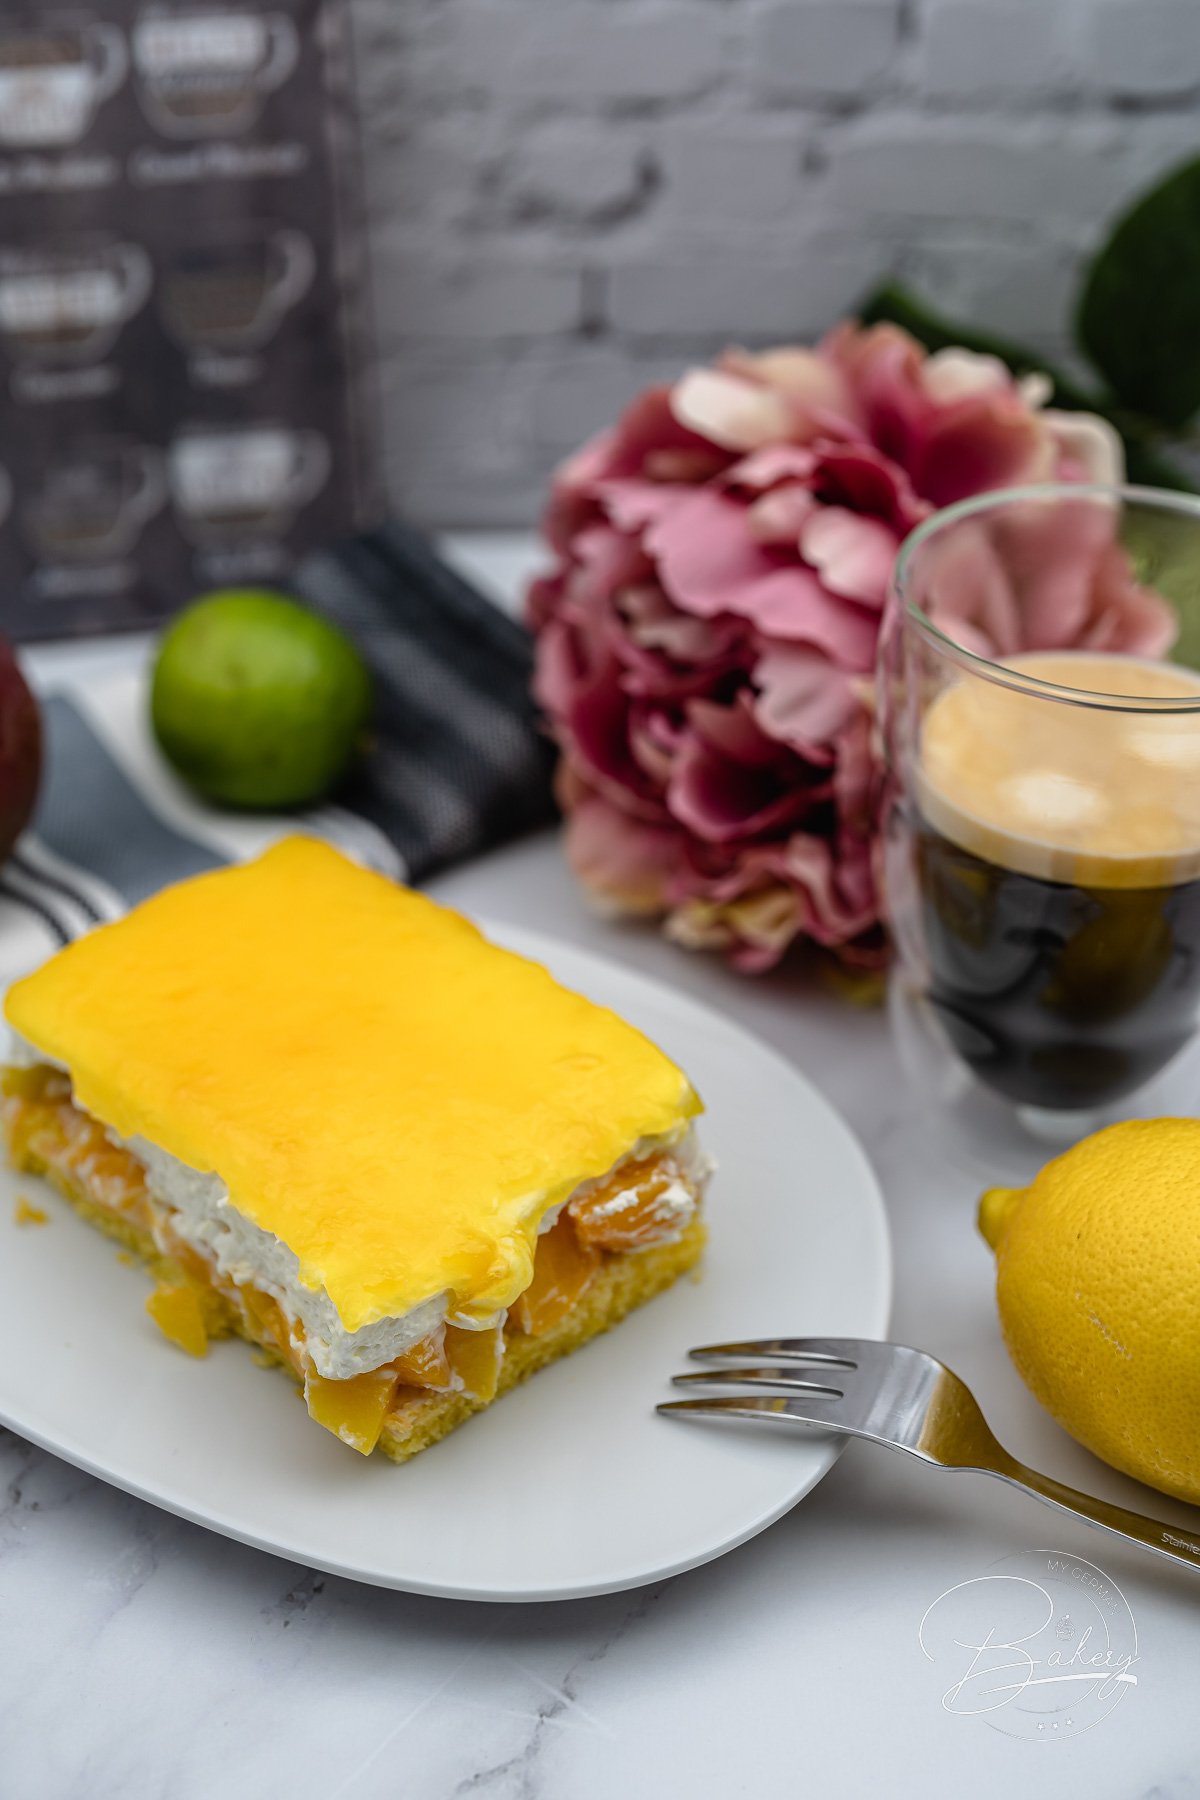 Cream cake without flour - sponge cake with passion fruit - gluten free - Passion fruit sponge cake gluten free - sponge cake with passion fruit - gluten free - baking without flour, cake without flour - use pudding powder instead of flour